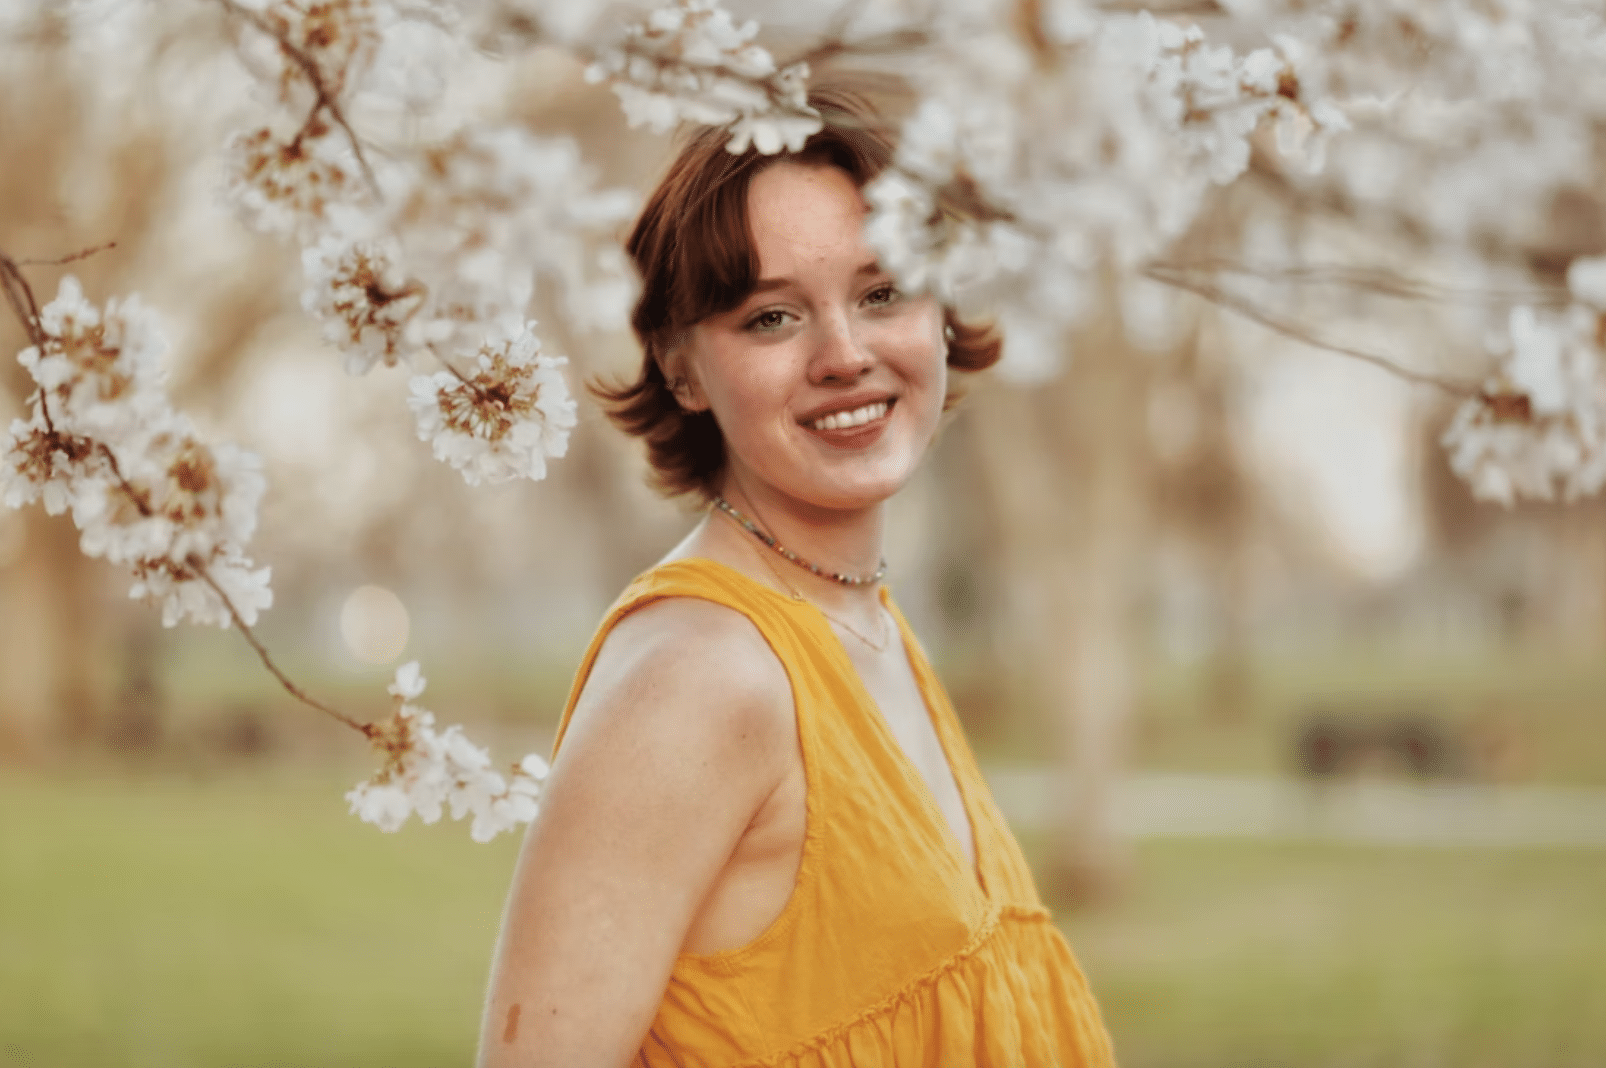 young woman by a blossom tree smiling wearing a yellow sleeveless top